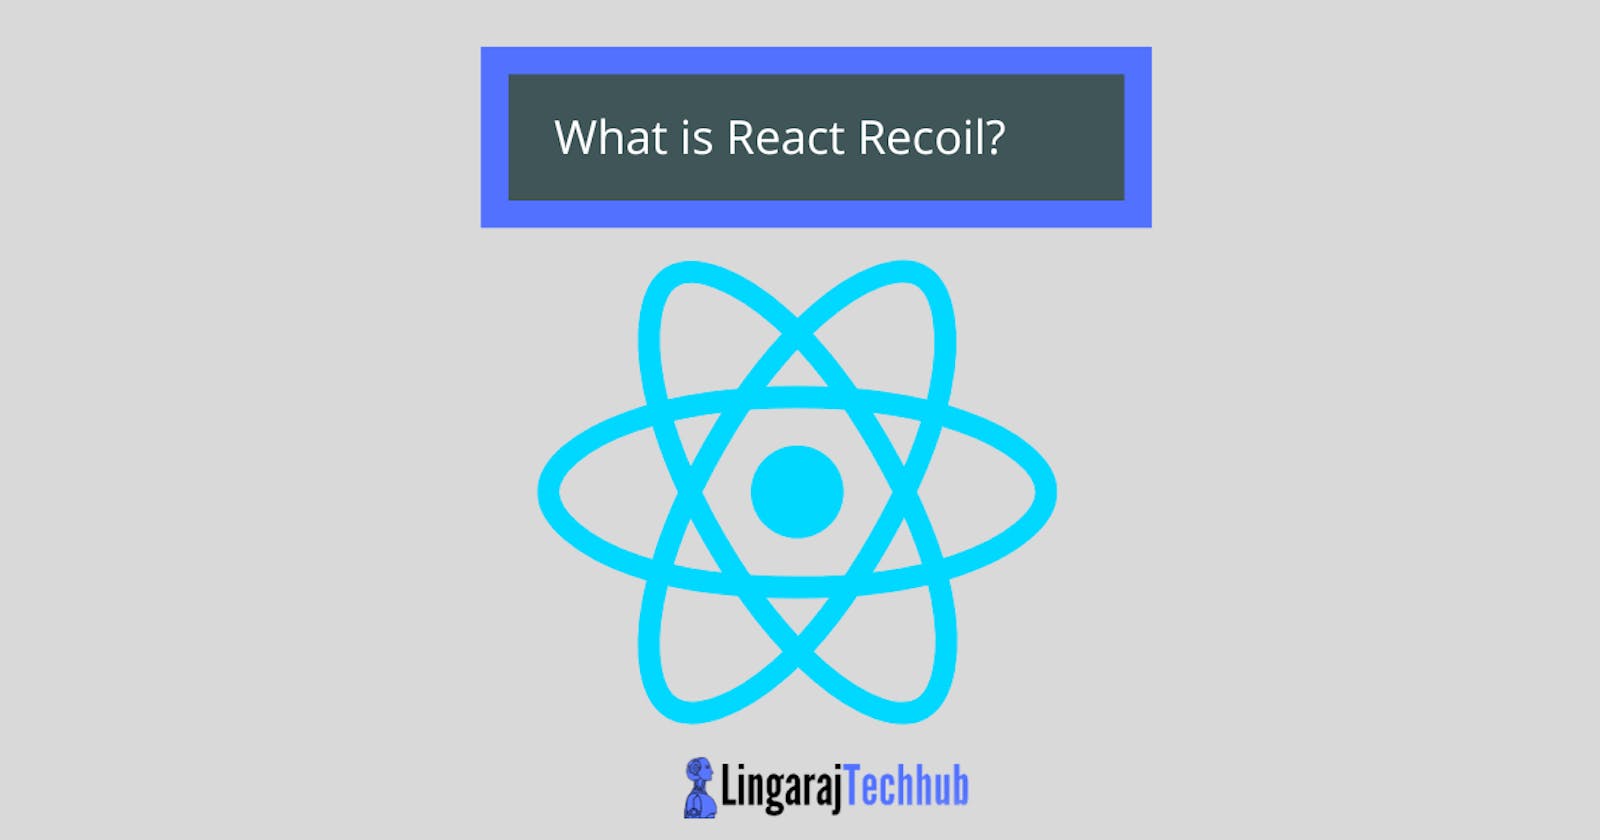 What is React Recoil?